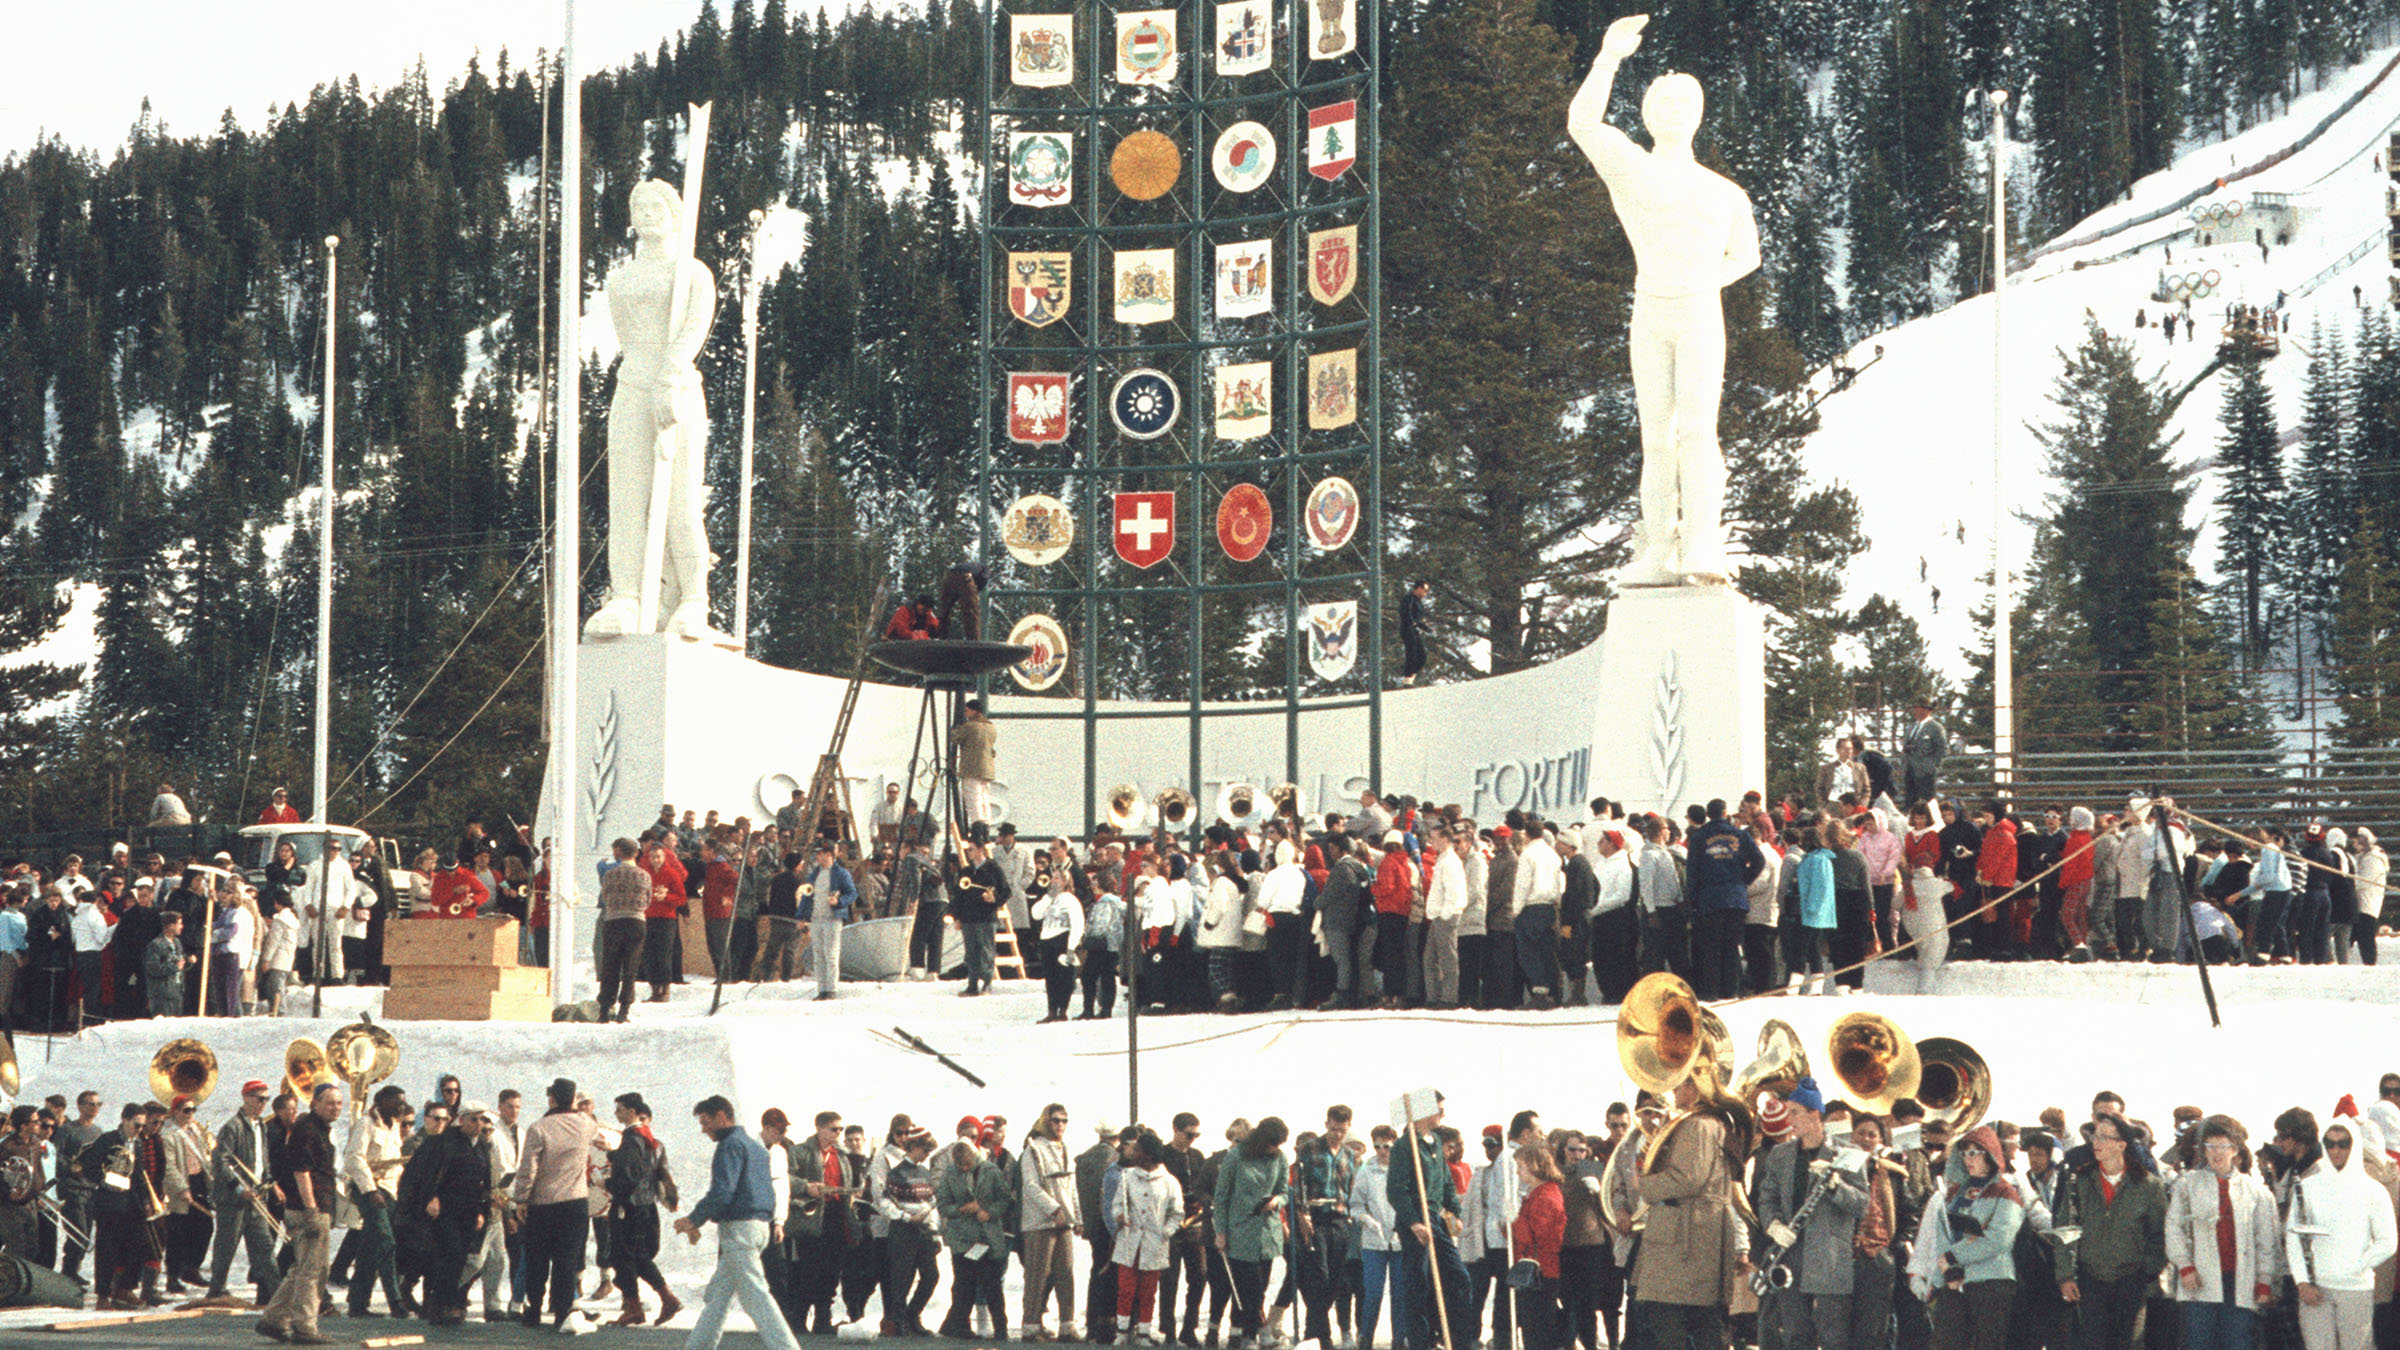 Historic photos of a crowd in front of the Olympic Rings at S* Valley during the 1960 Winter Games. Photo by Bill Briner